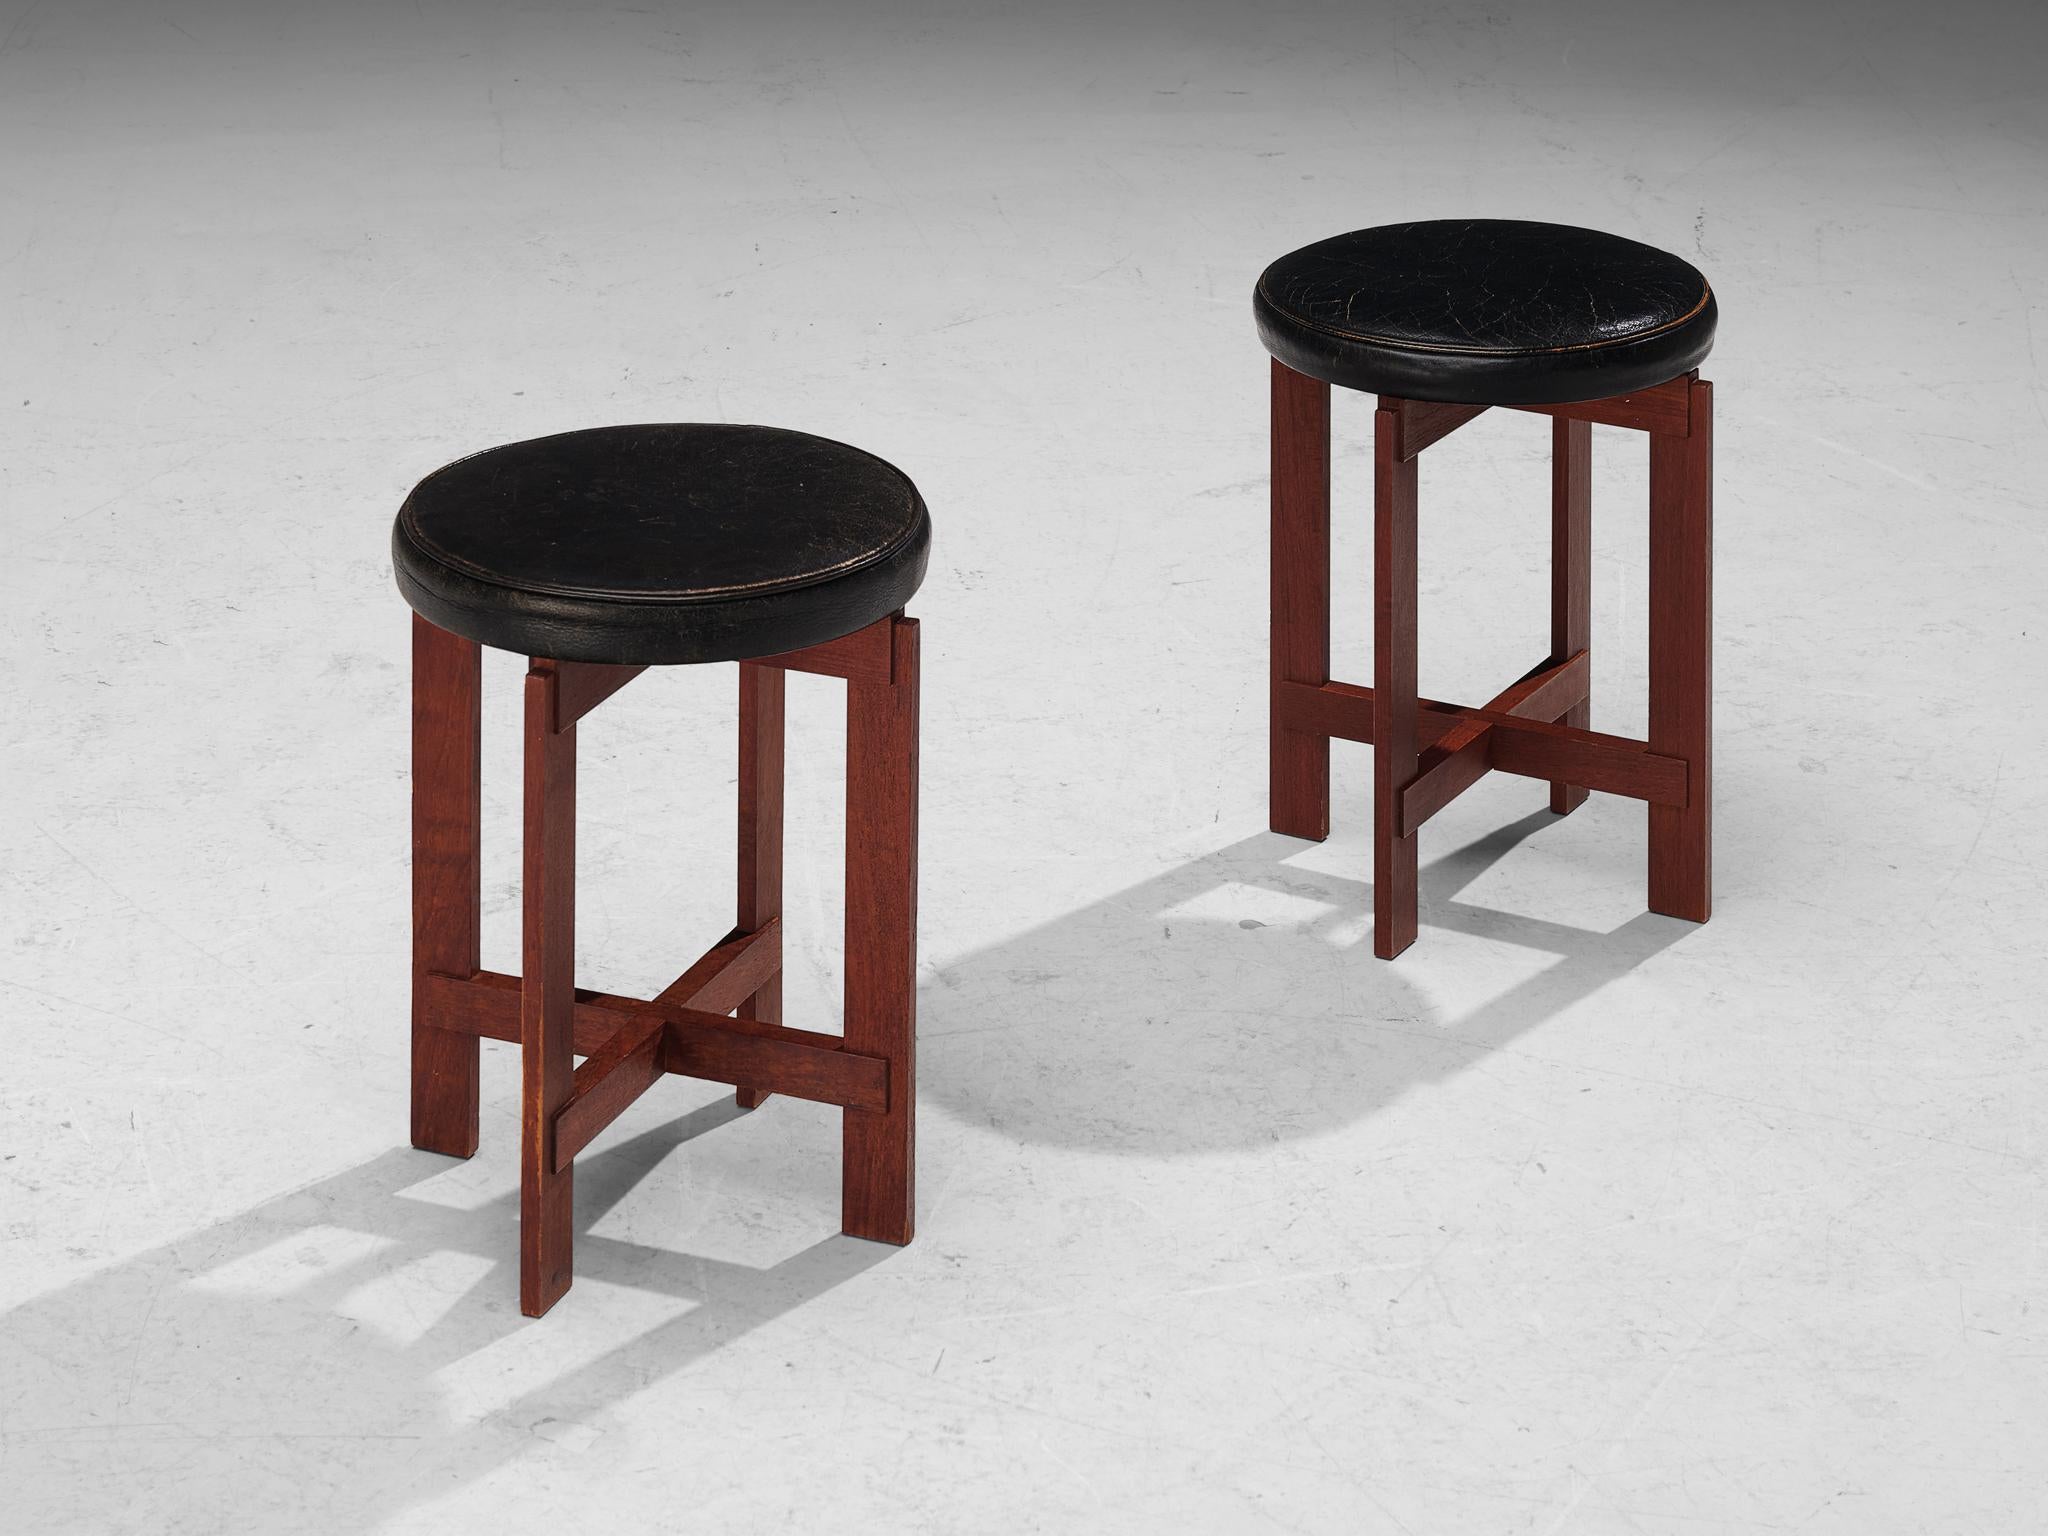 Uno & Östen Kristiansson for Luxus of Sweden, pair of stools. leather, teak, France, 1950s

Elegant in line and practical to use, these stools by Uno & Östen Kristiansson are exemplary for Mid-Century Scandinavian Design. The seat embodies a nice